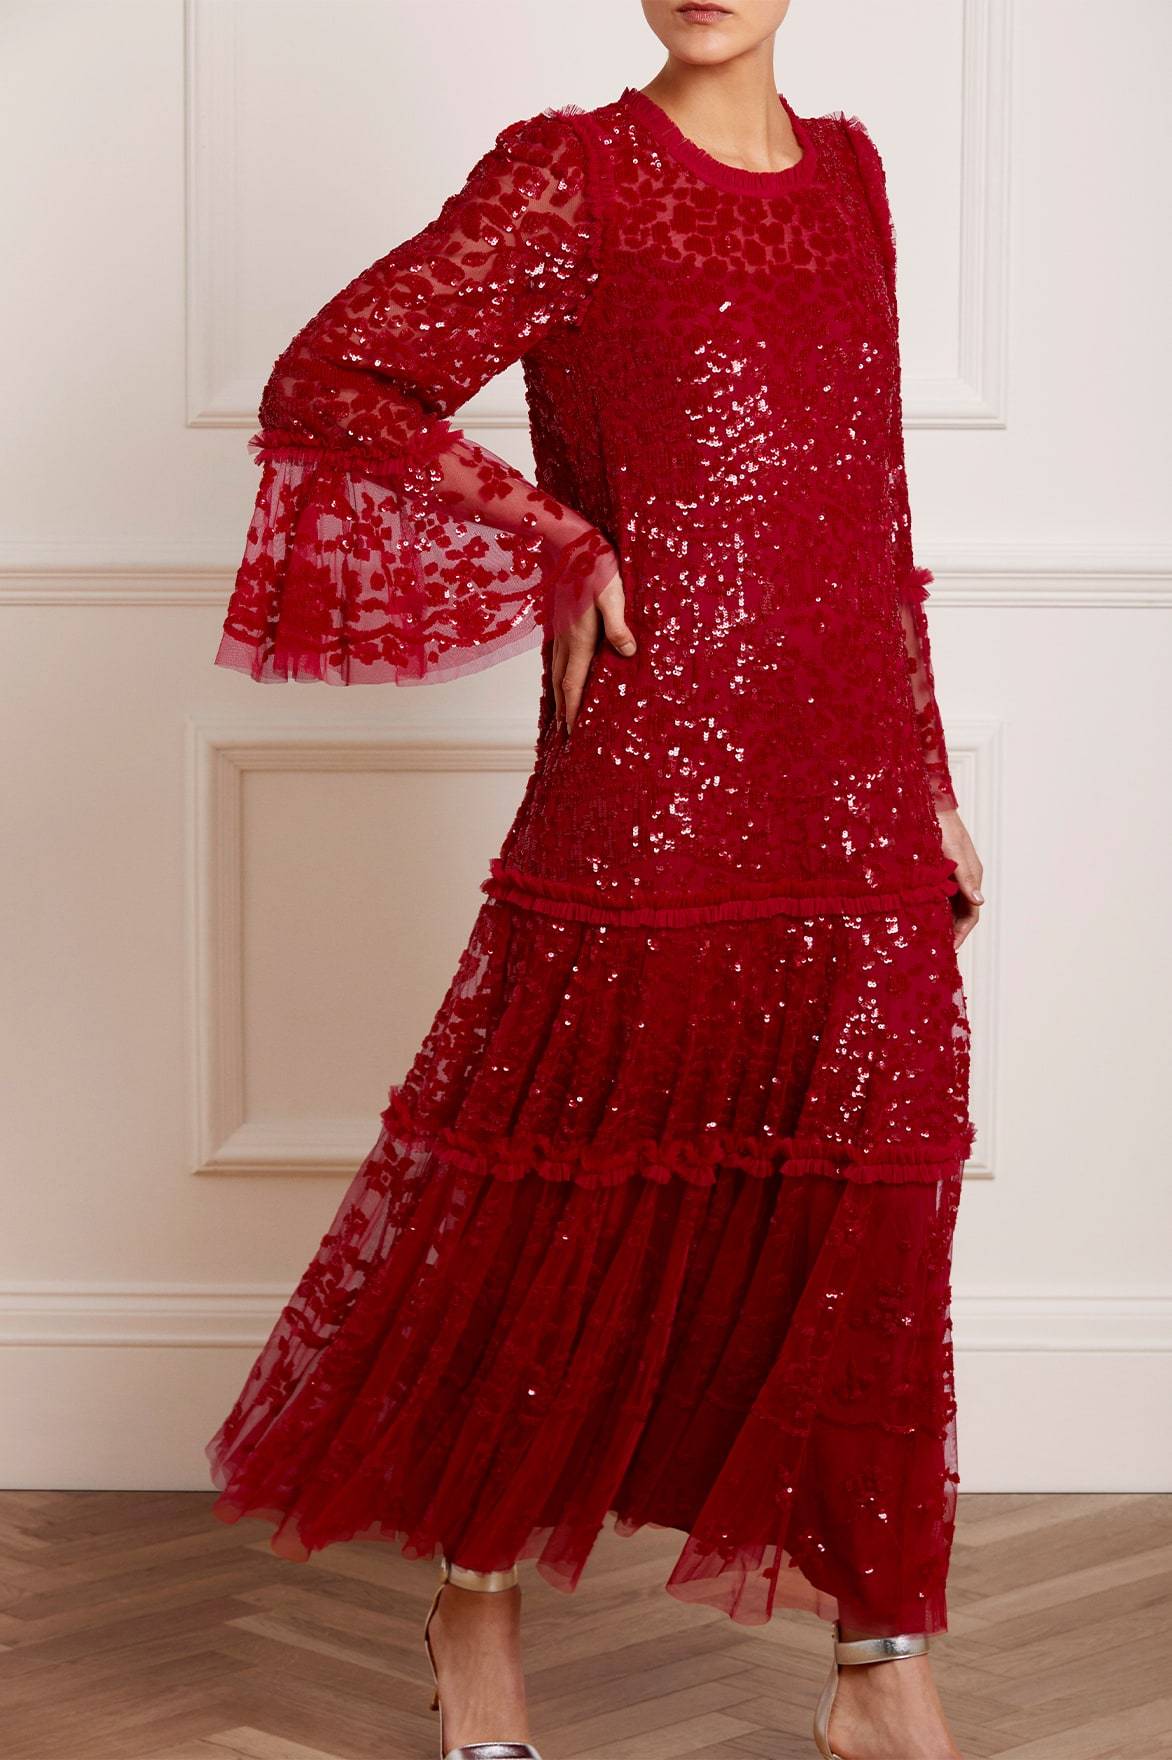 Buy Boardwalk Empire Inspired Dresses Needle  Thread Annie Sequin Tiered Ankle Gown Red US 16 $1,029.00 AT vintagedancer.com